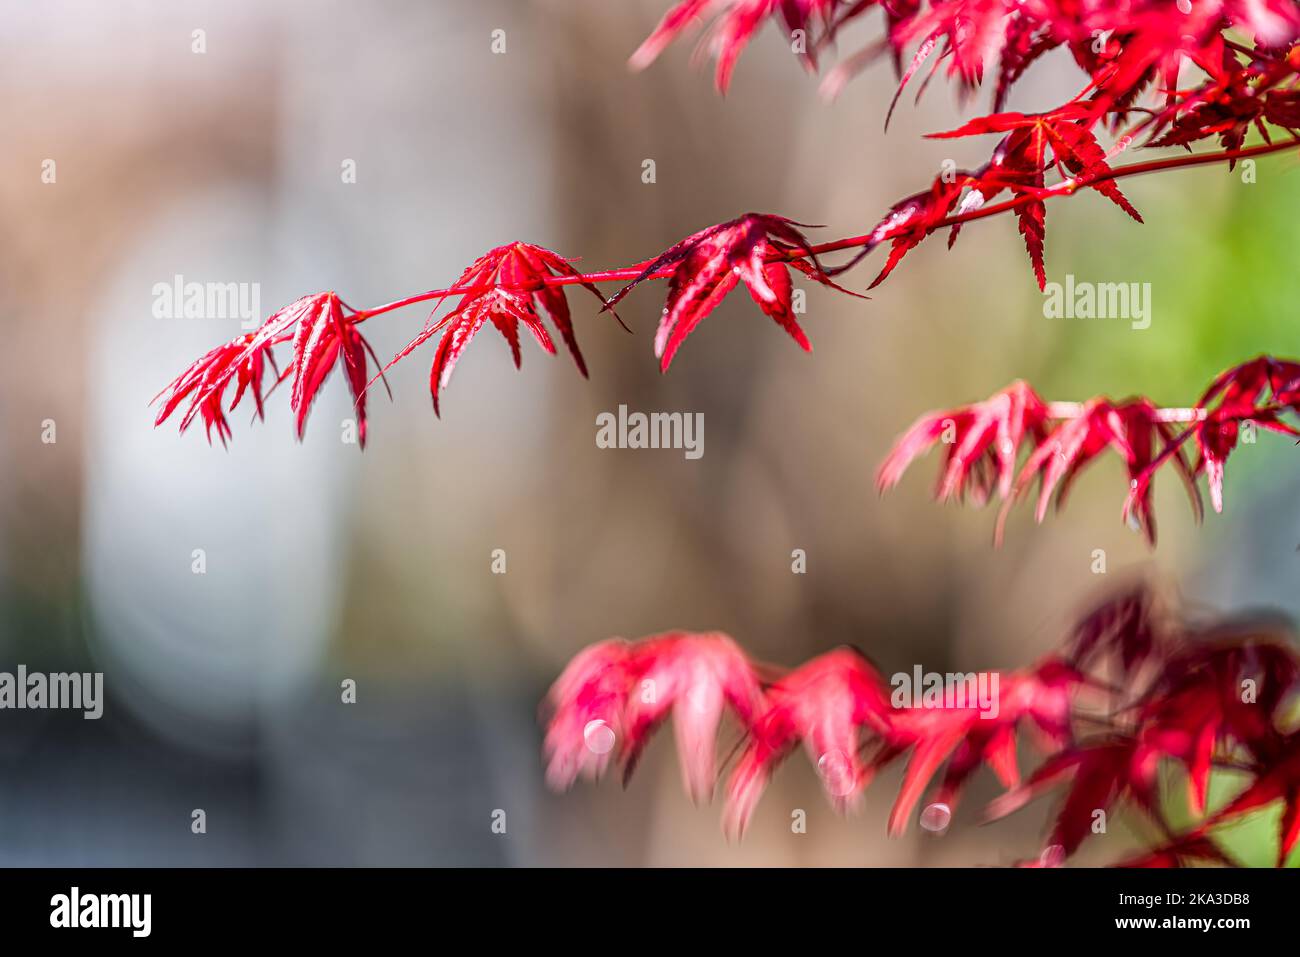 Macro closeup of red Japanese maple tree branch with leaves fall auautmn foliage in Kyoto, Japan with rain water drops Stock Photo